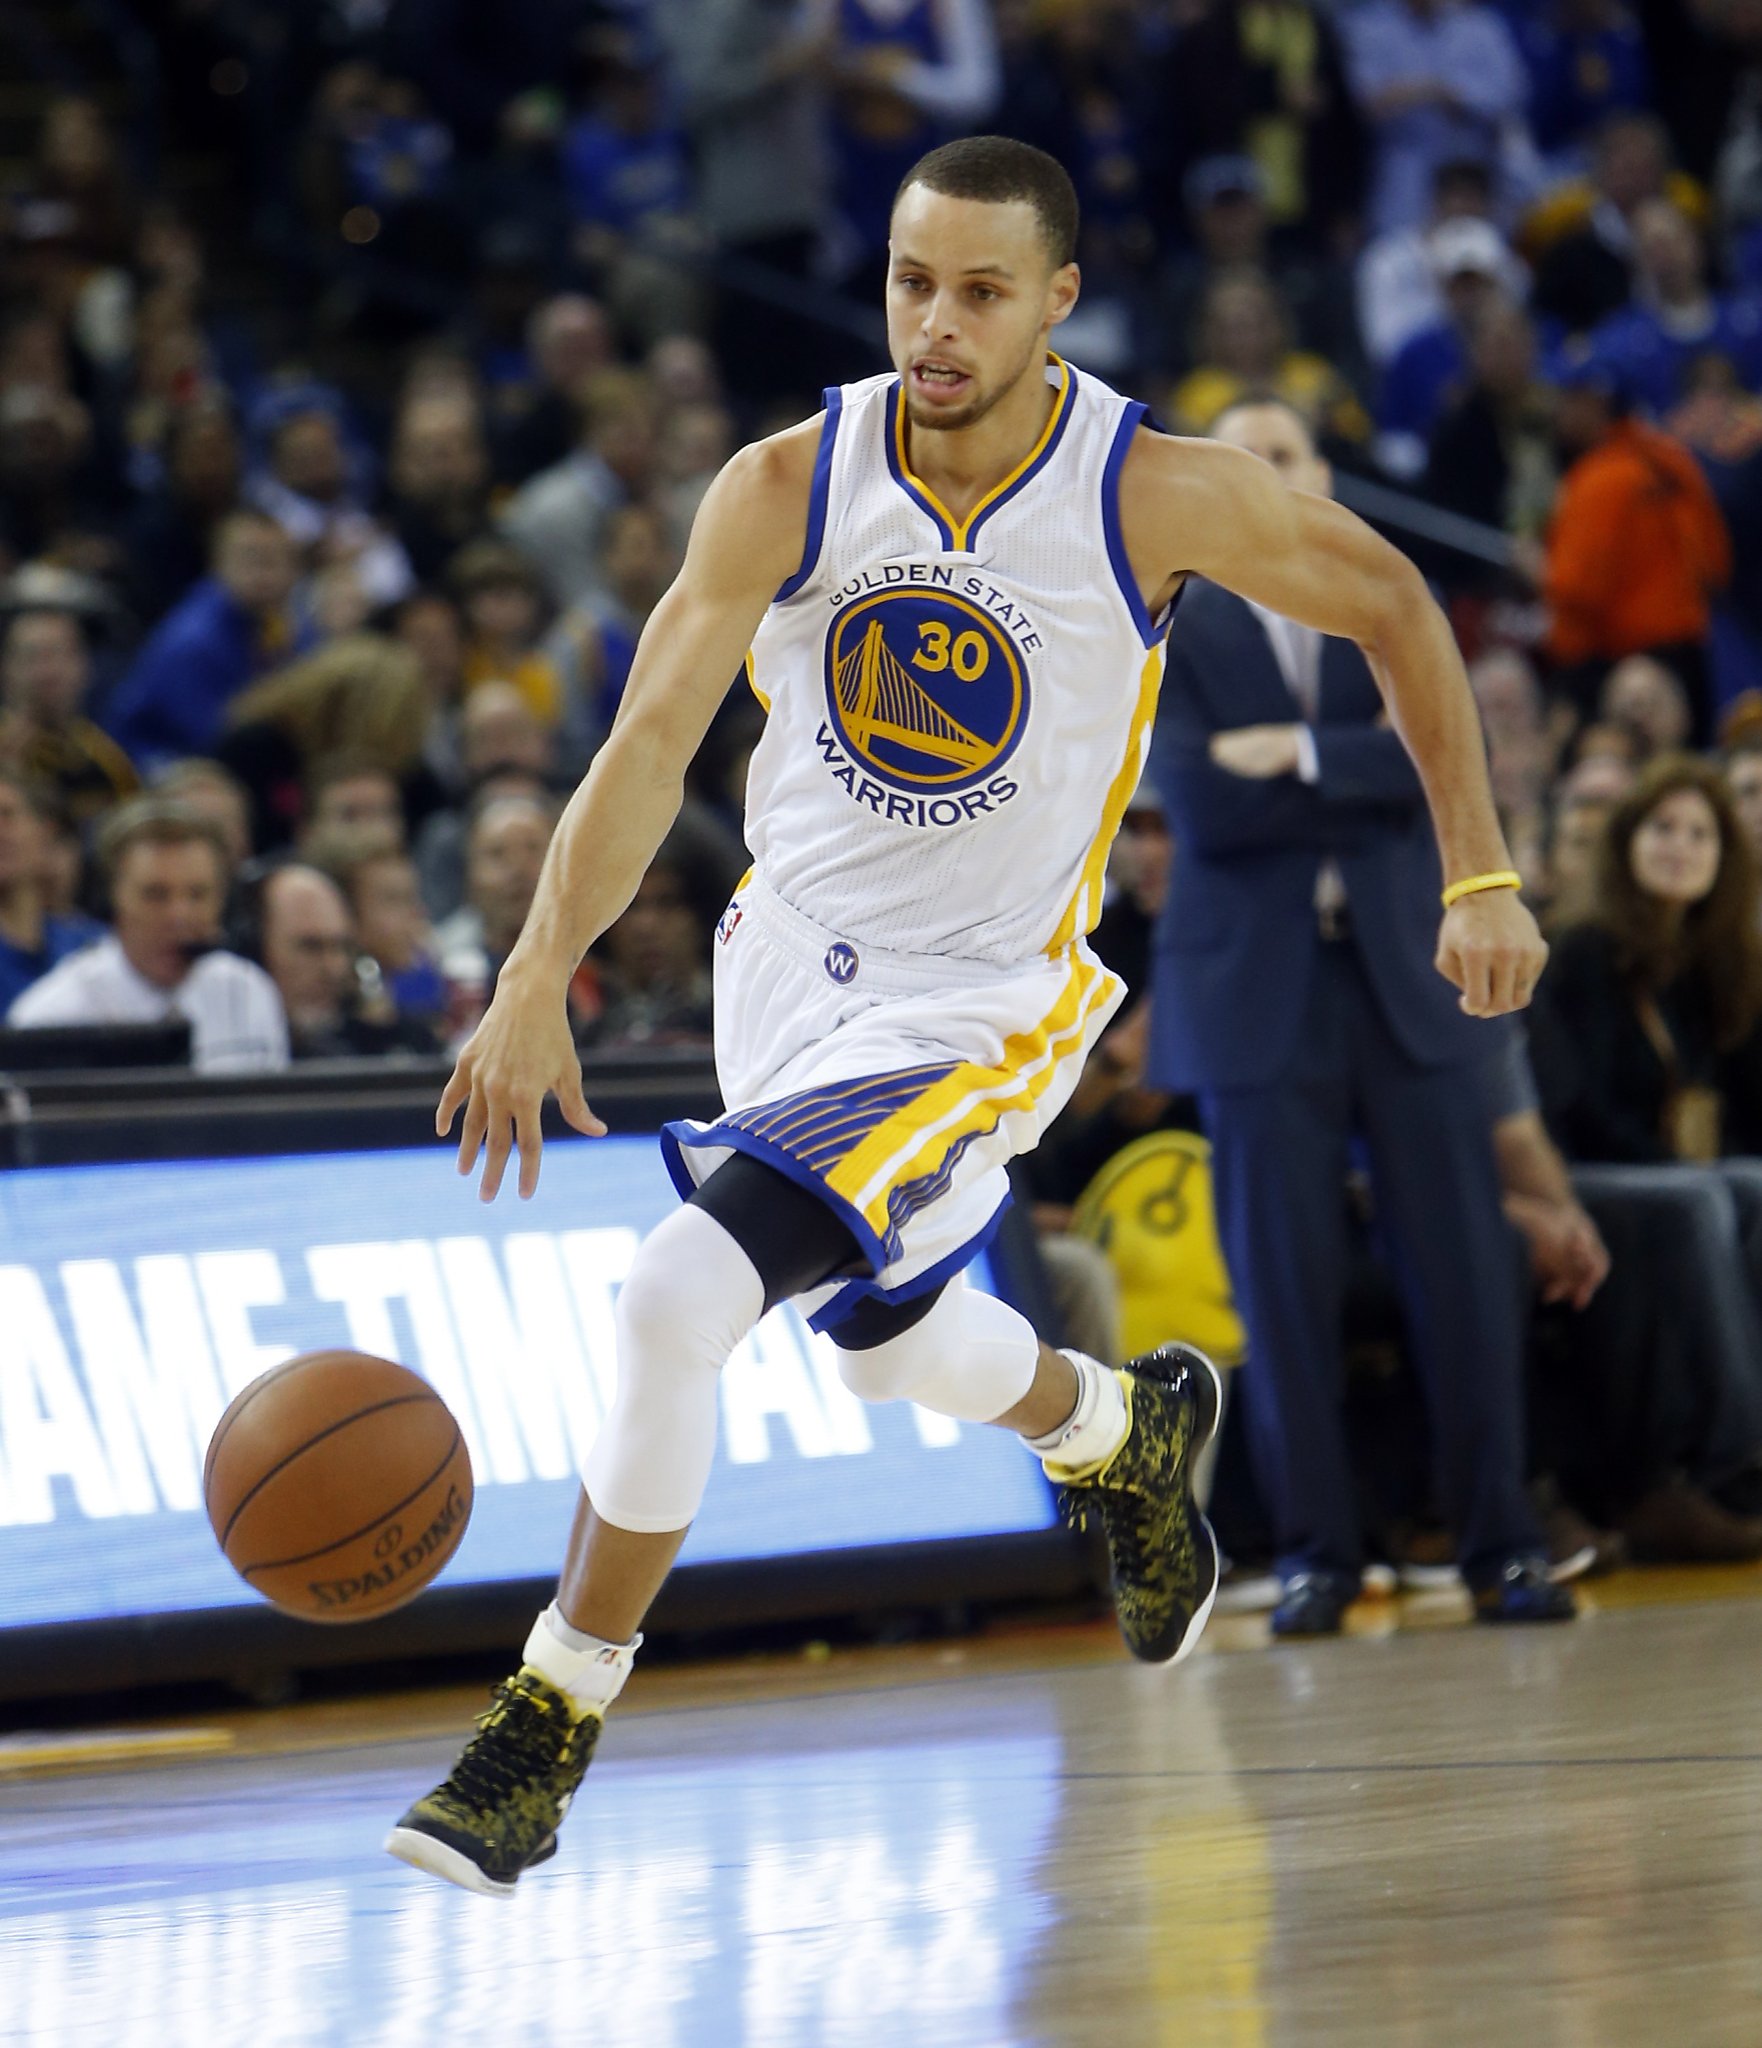 Despite height, Curry stood tall in high school ranks